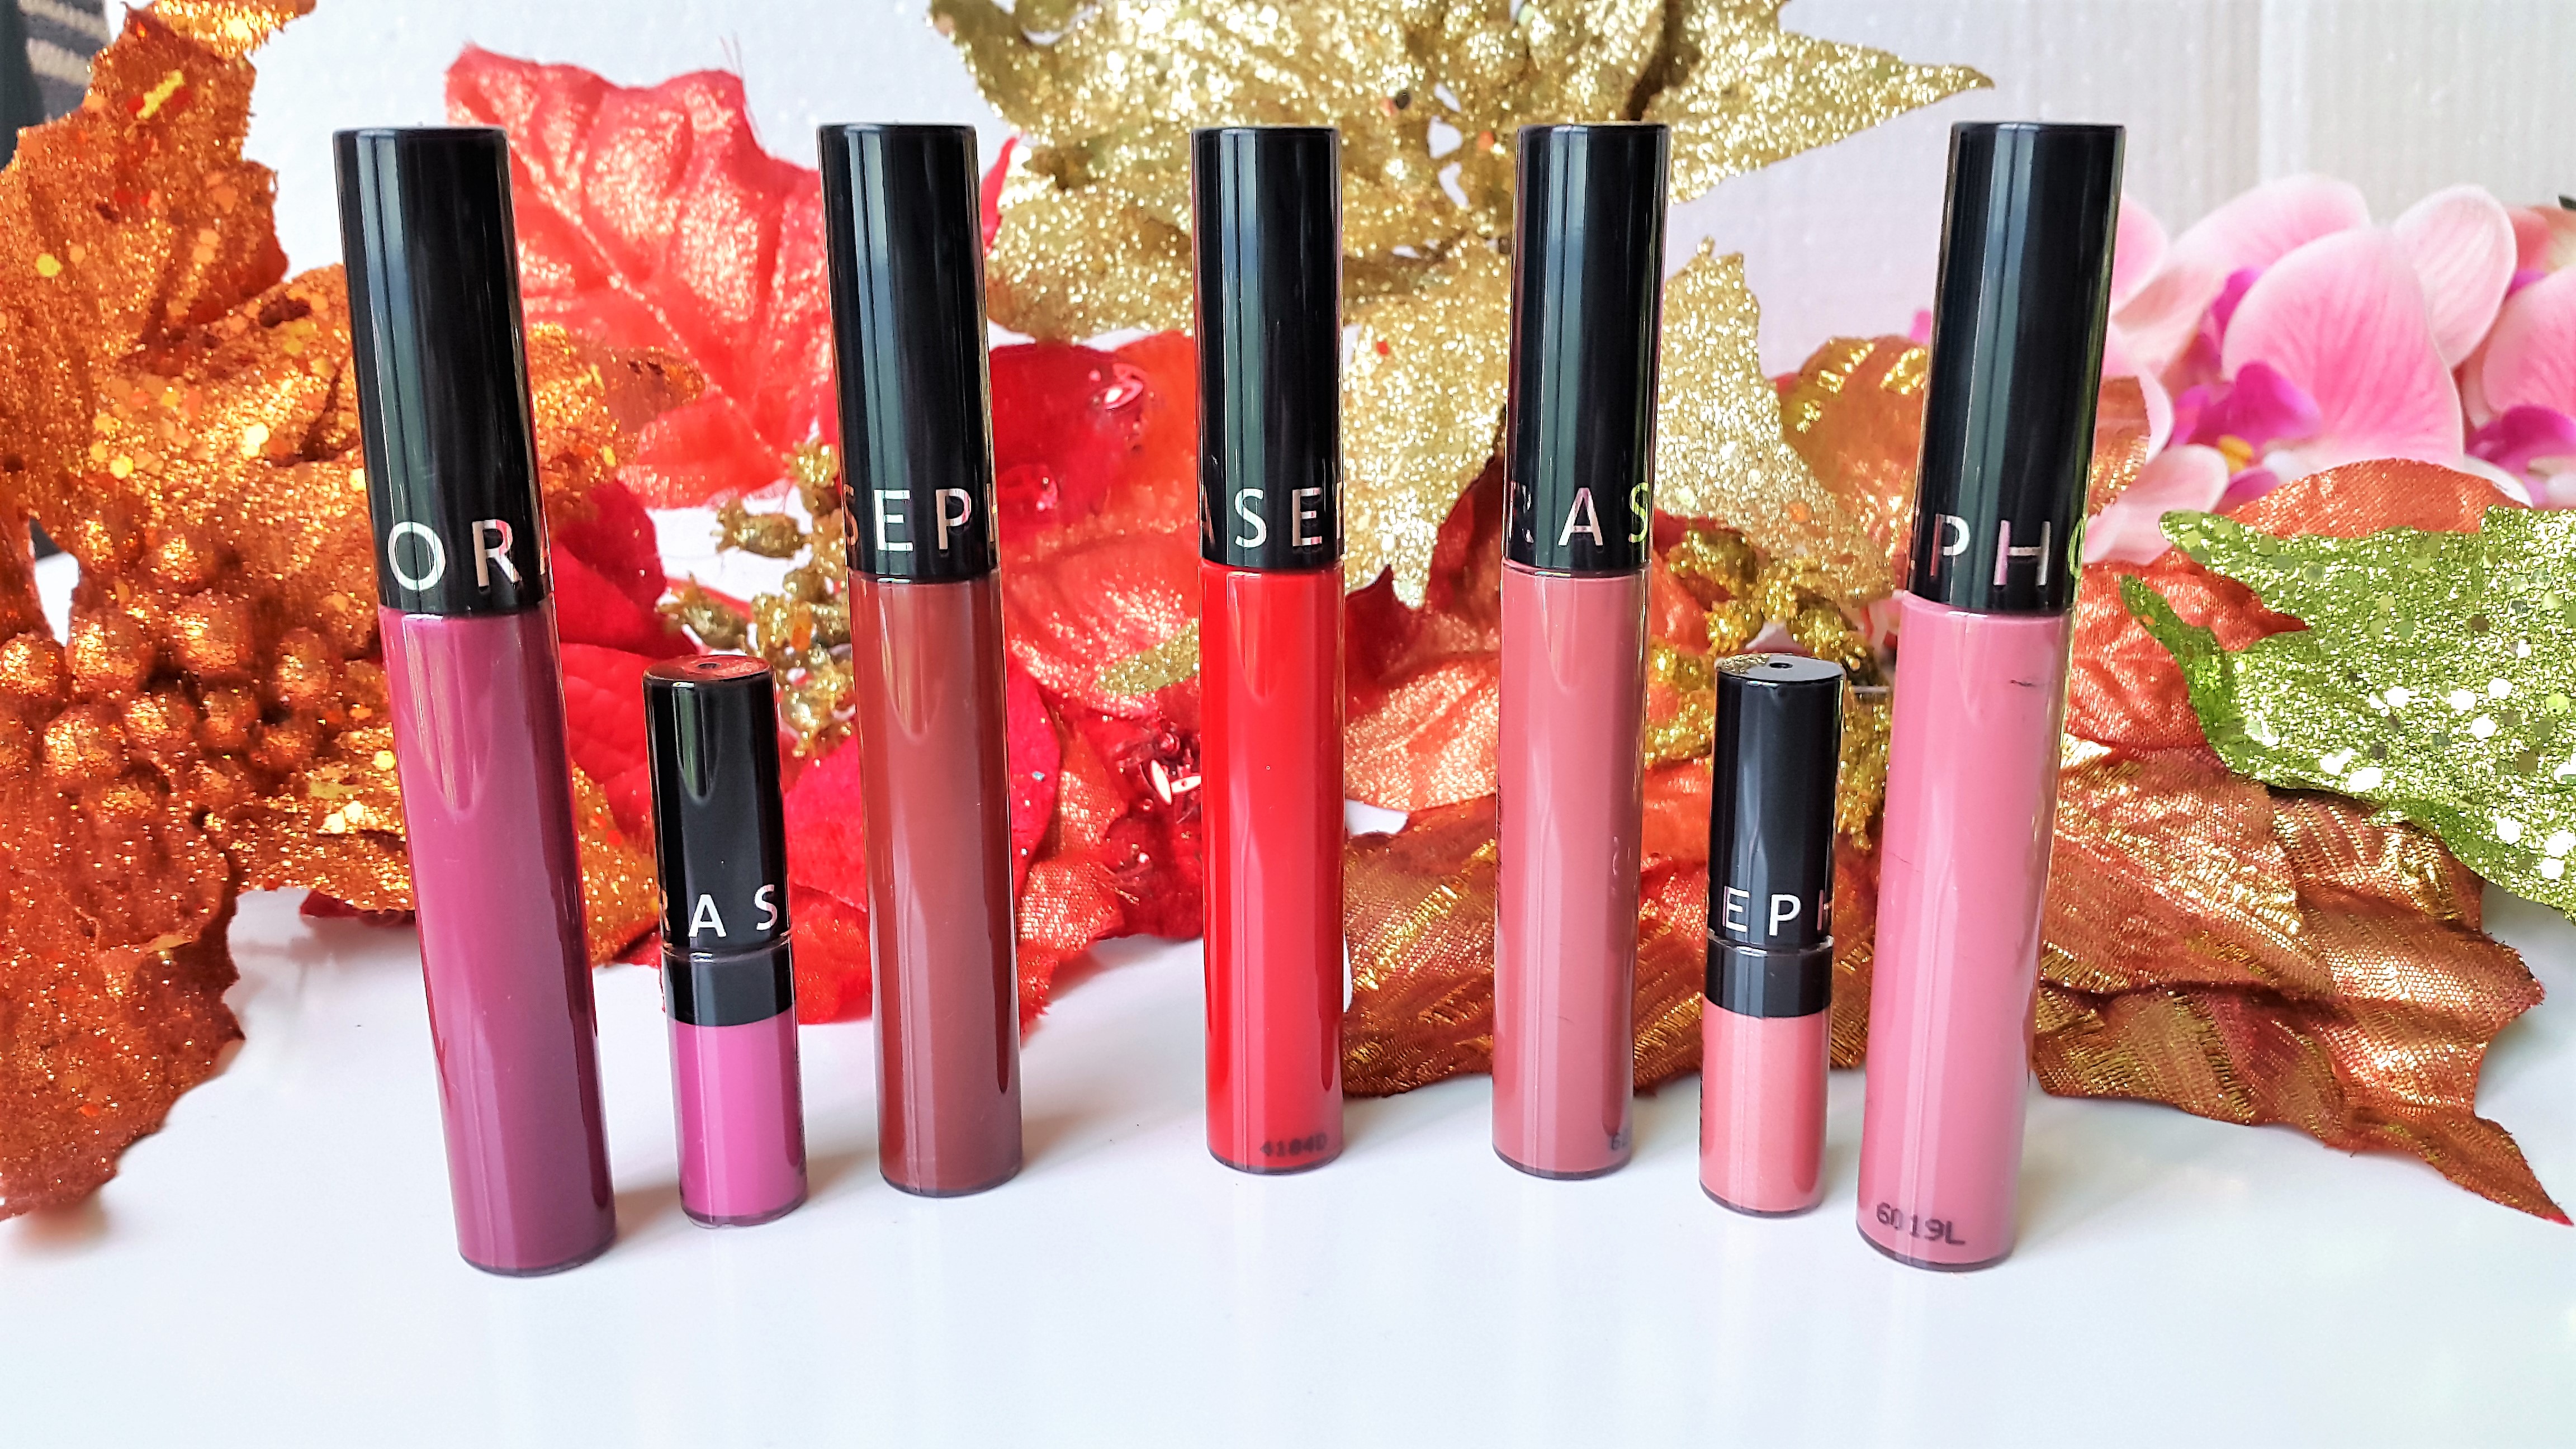 Sephora Cream Lip Stain Review + Swatches, 7 Shades